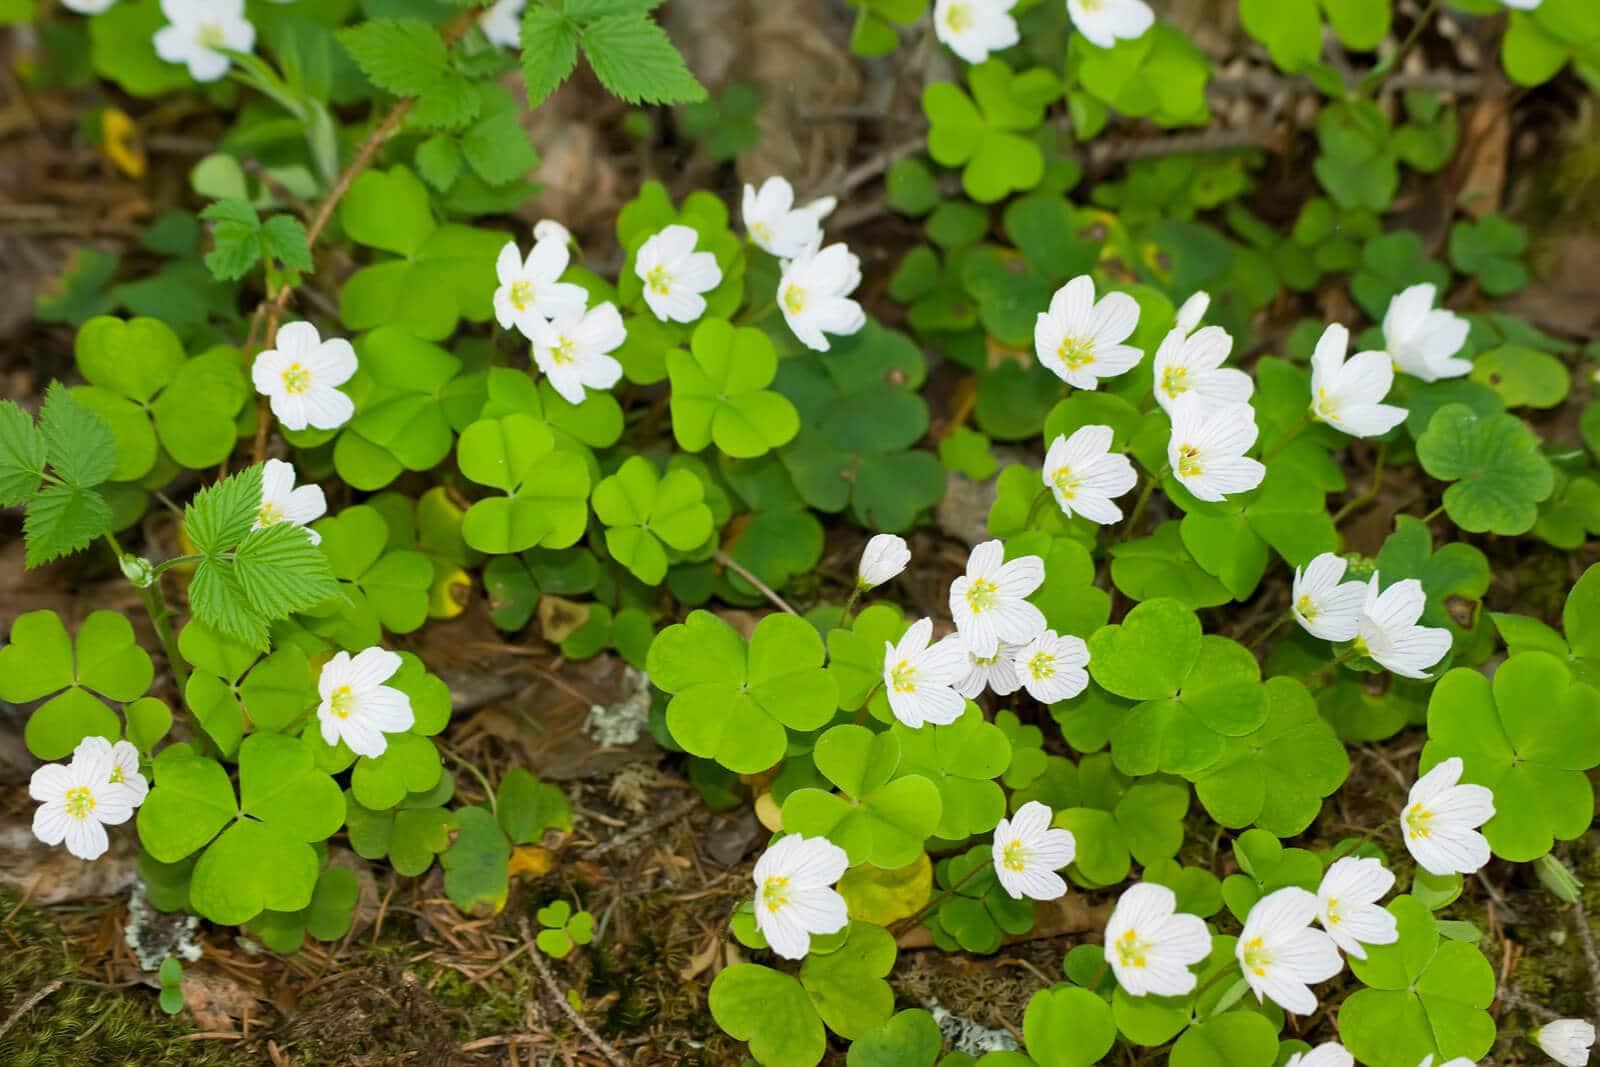 How To Get Rid Of Oxalis Without Killing Grass